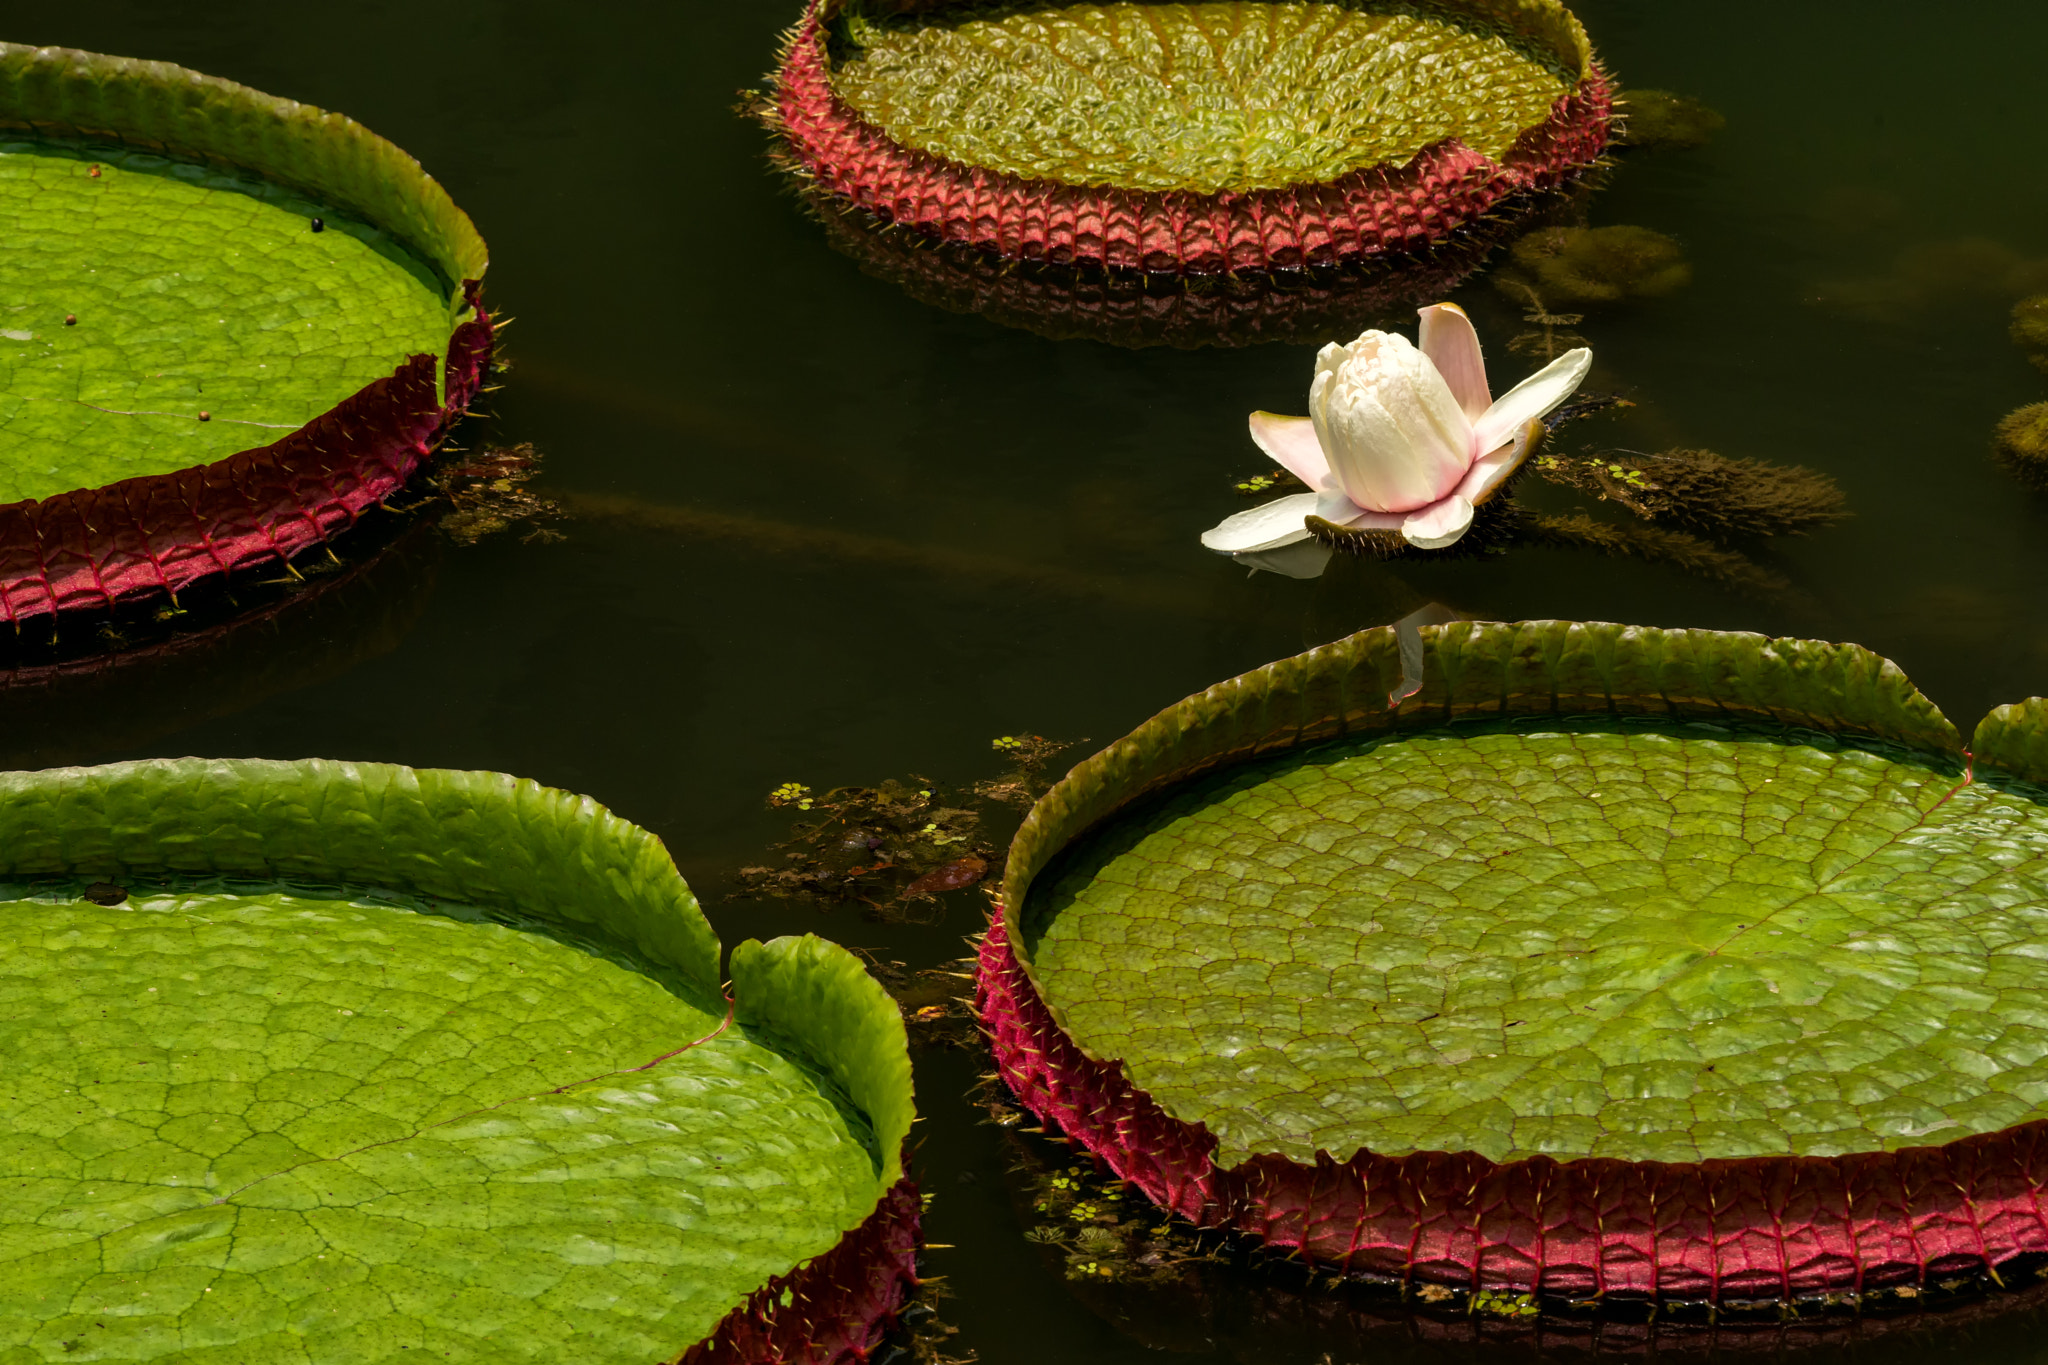 Sony a99 II sample photo. Water lily and pads photography